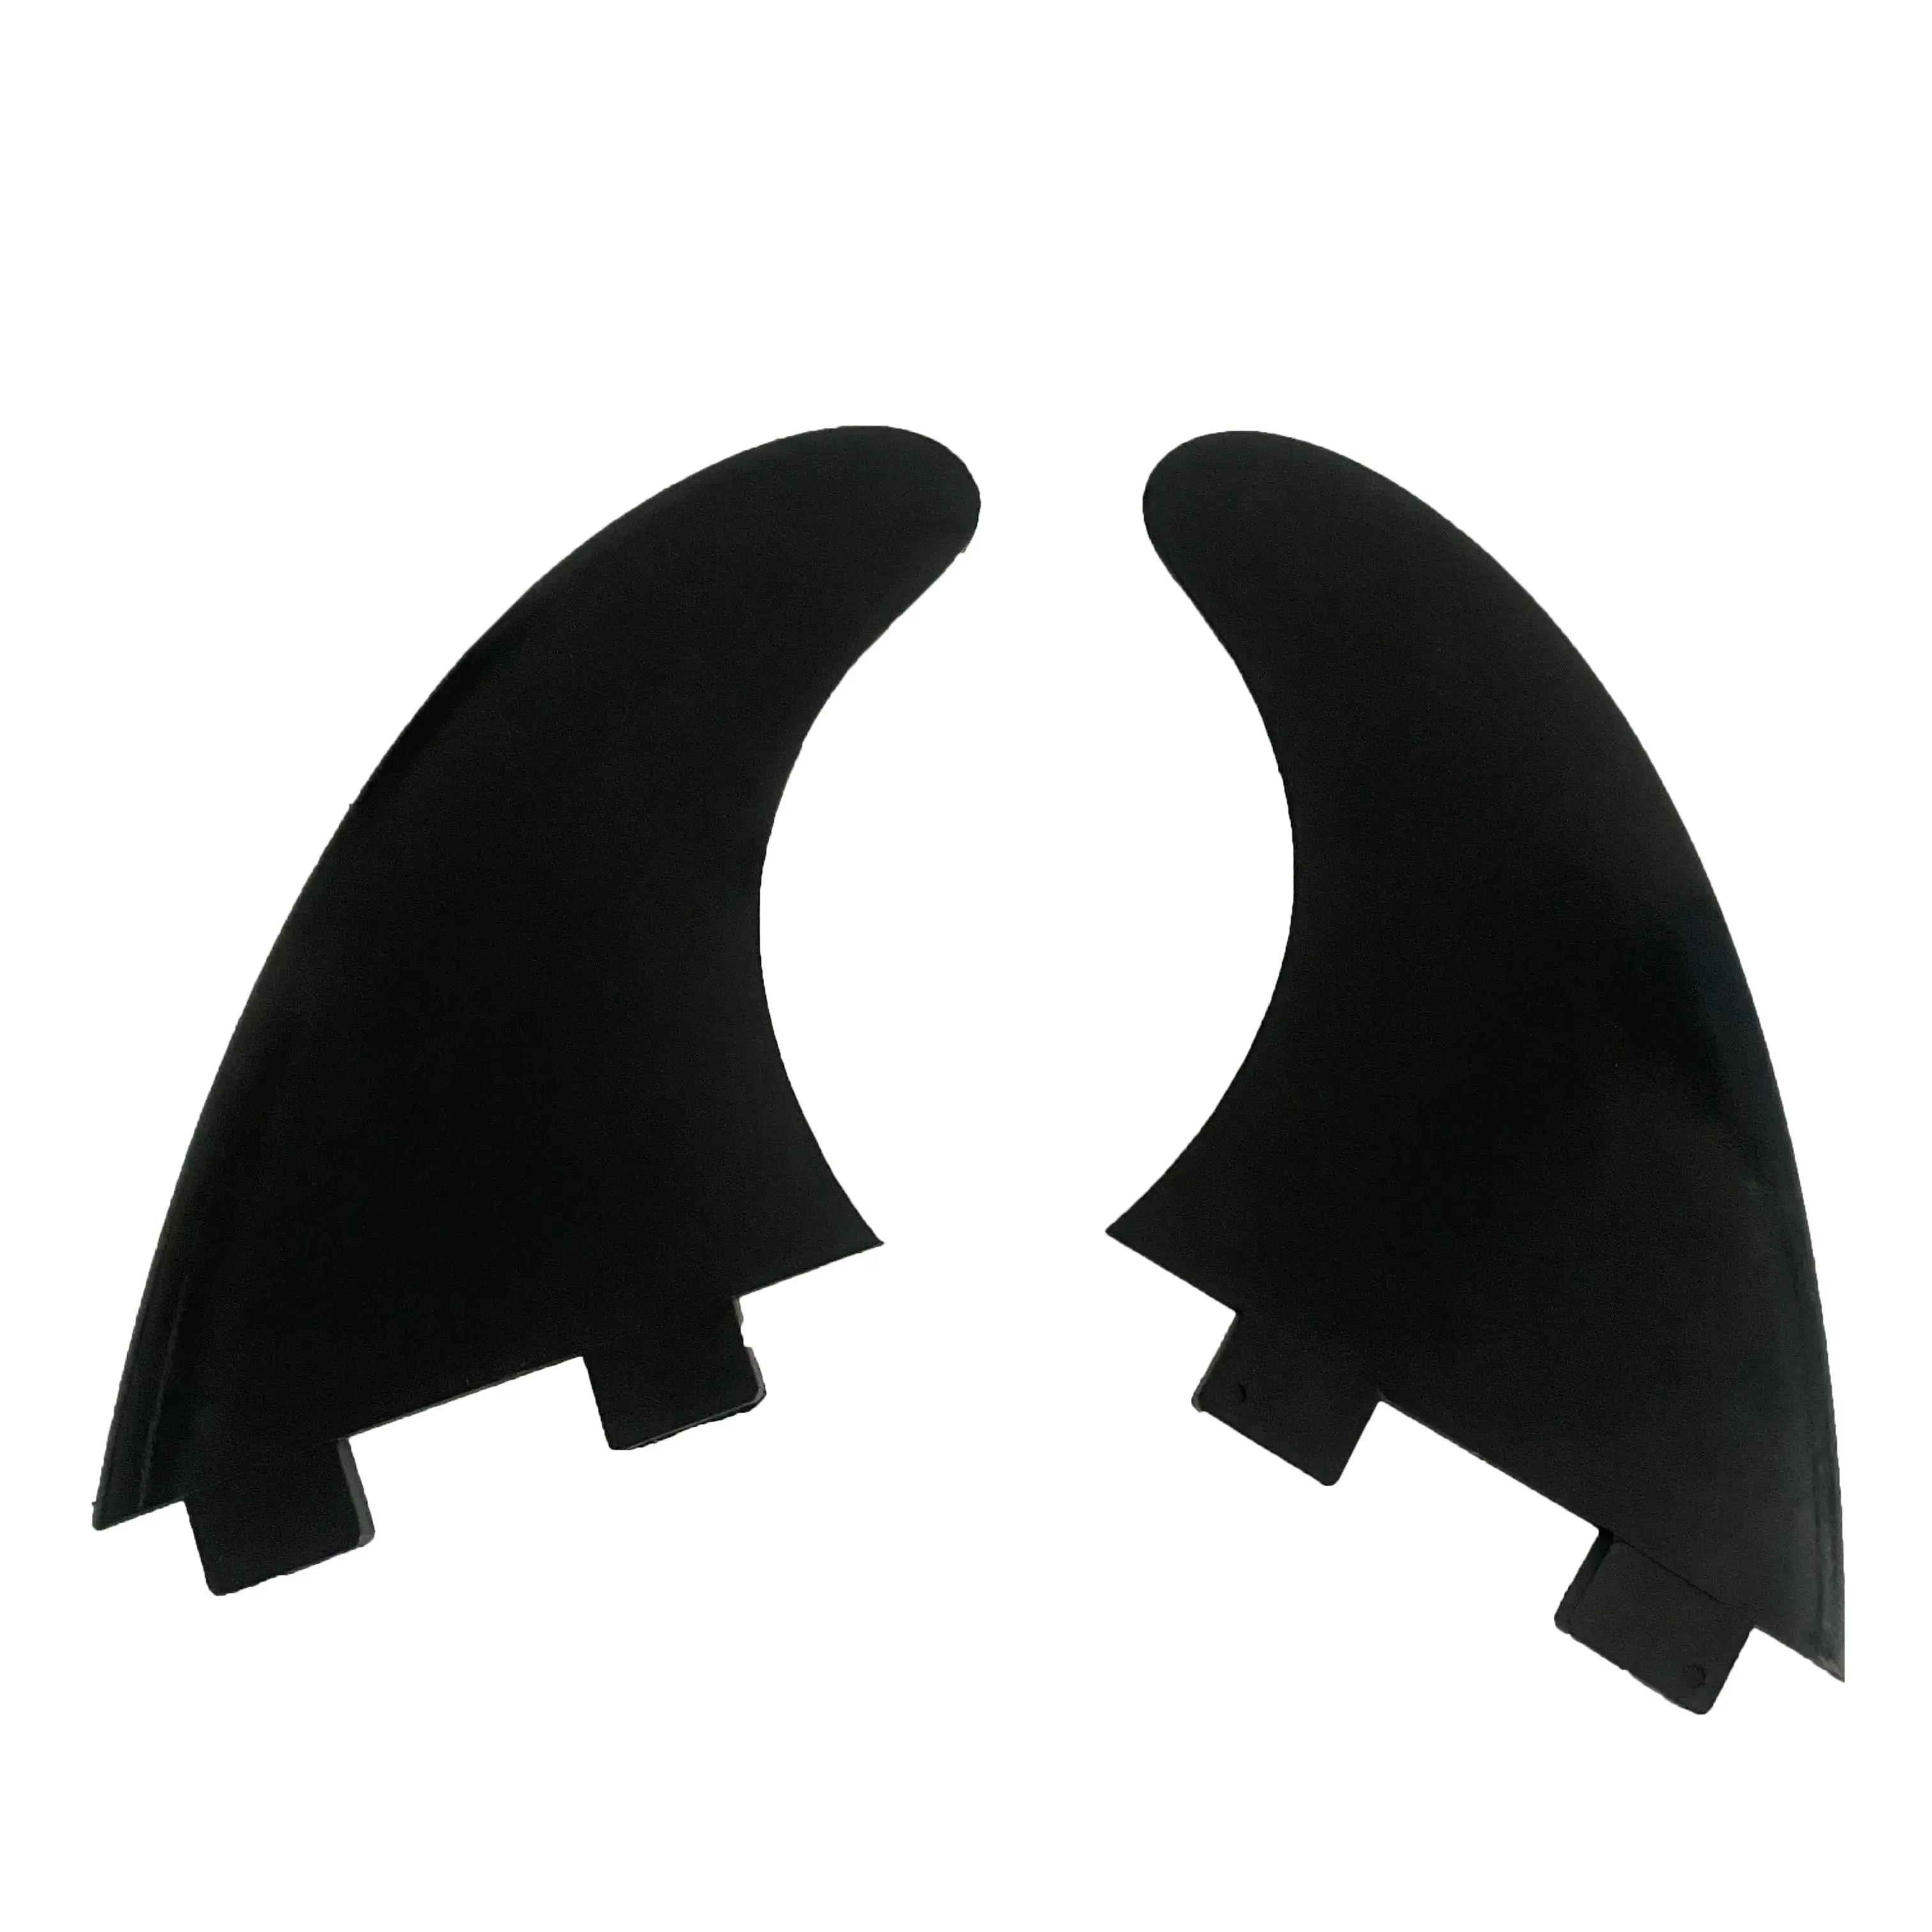 2 Pcs G5 Surfboard Fins SUP Accessory Surf Fin Paddle Board Fin surf paddle board assault boat tent rubber boat boat electric air pump